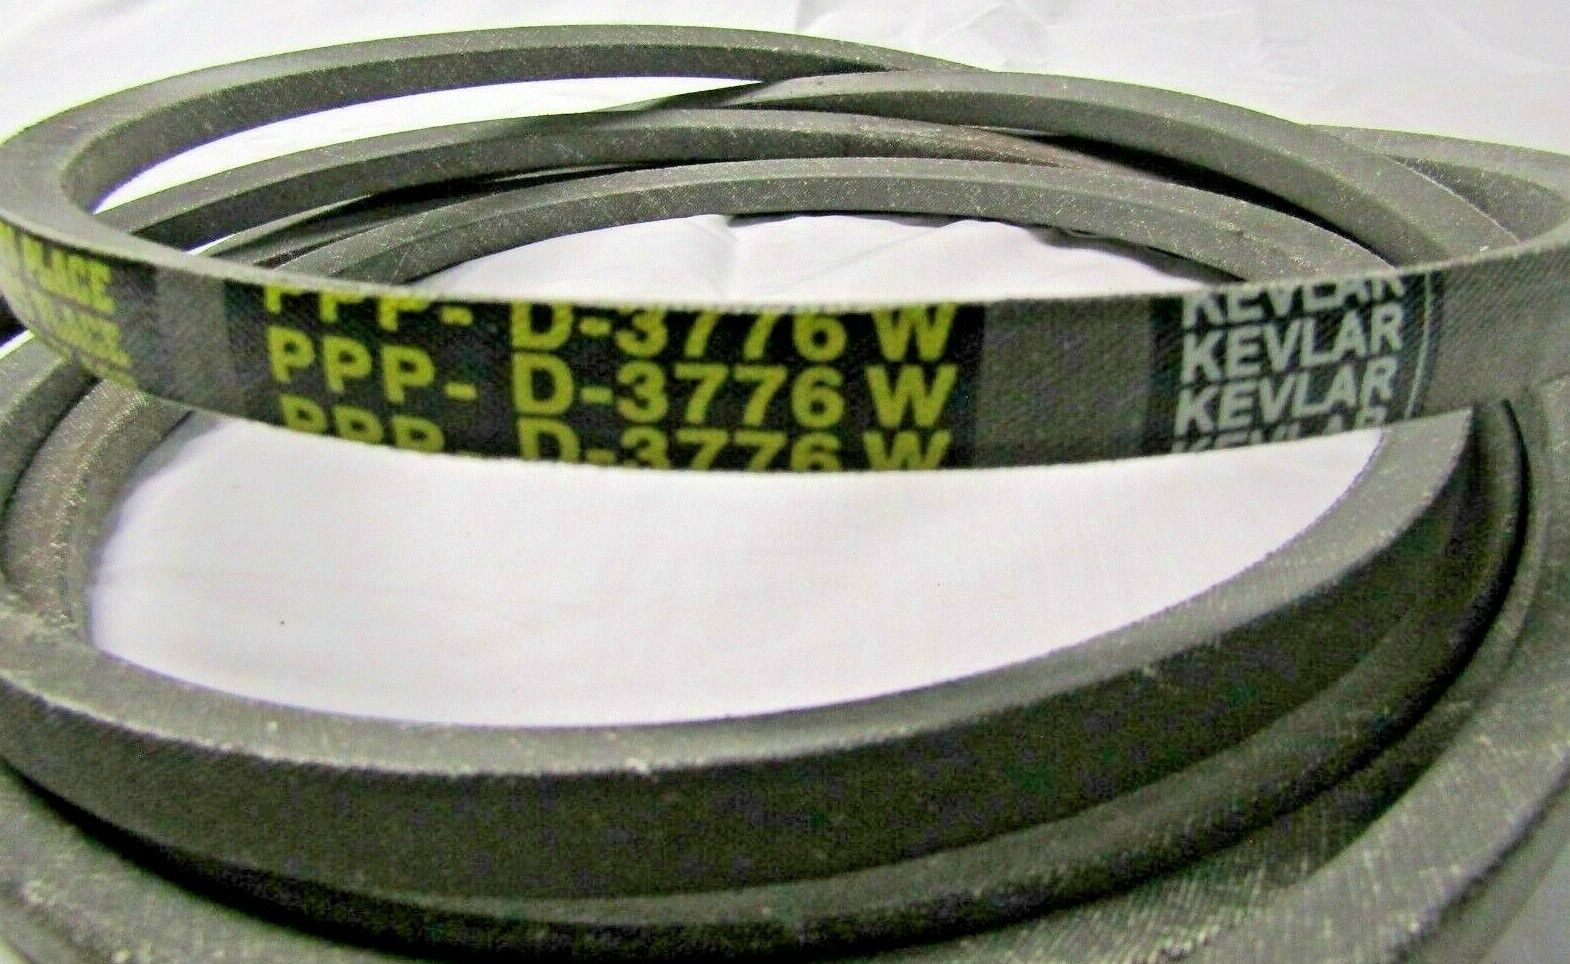 ENGINE TO DECK BELT COUNTRY CLIPPER D-3776-W D3776W 5/8" X 182.5" SEVERAL MODELS - 0